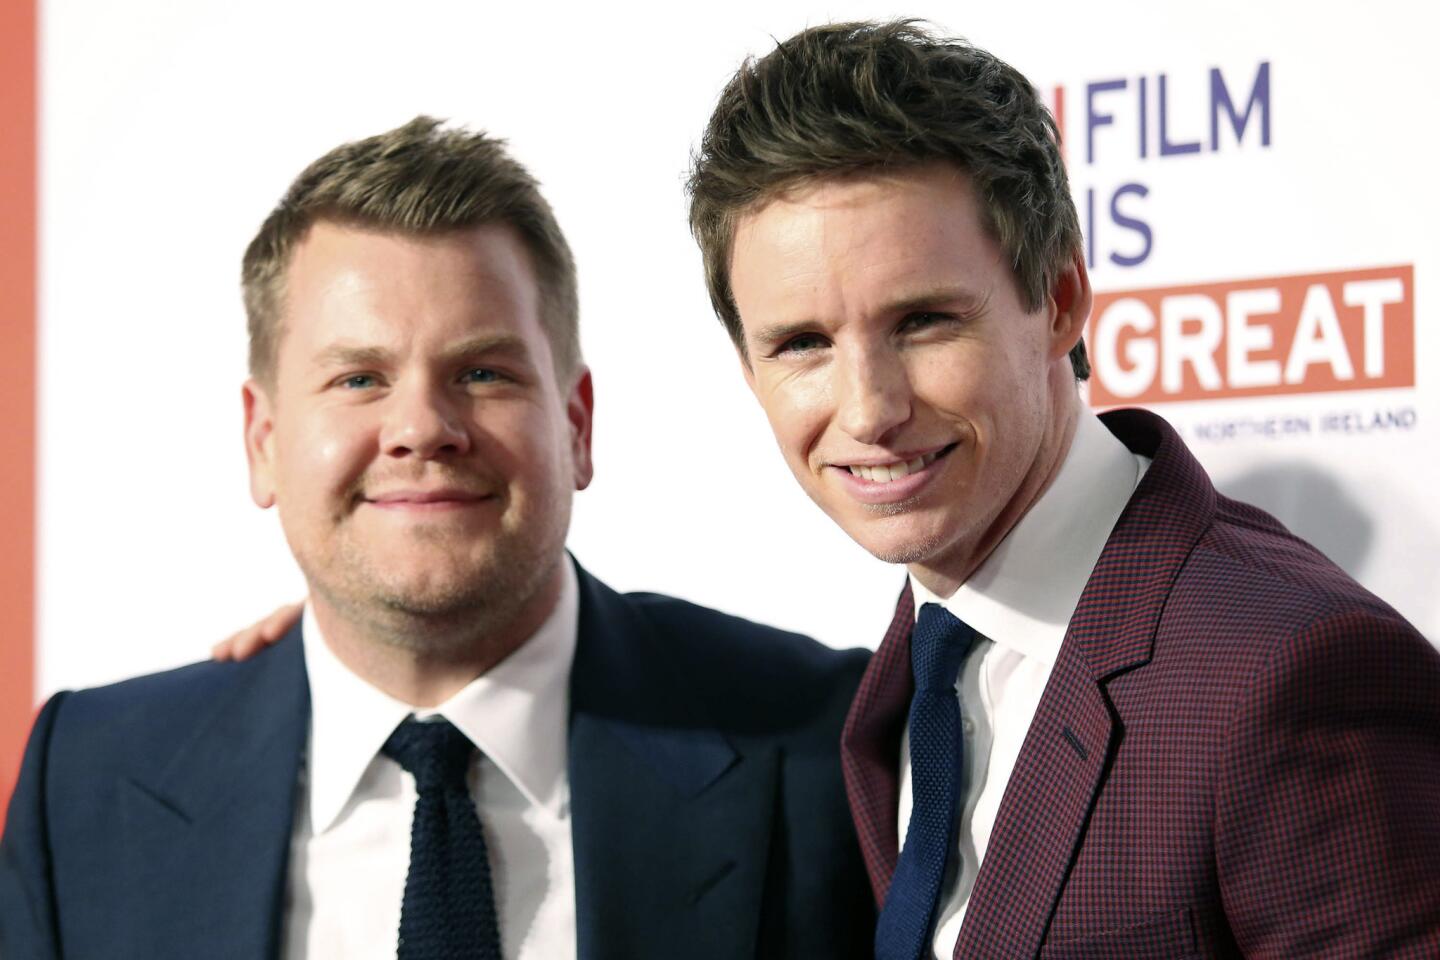 James Corden and Eddie Redmayne attend the Film Is Great reception at Fig & Olive on Feb. 26 in West Hollywood.